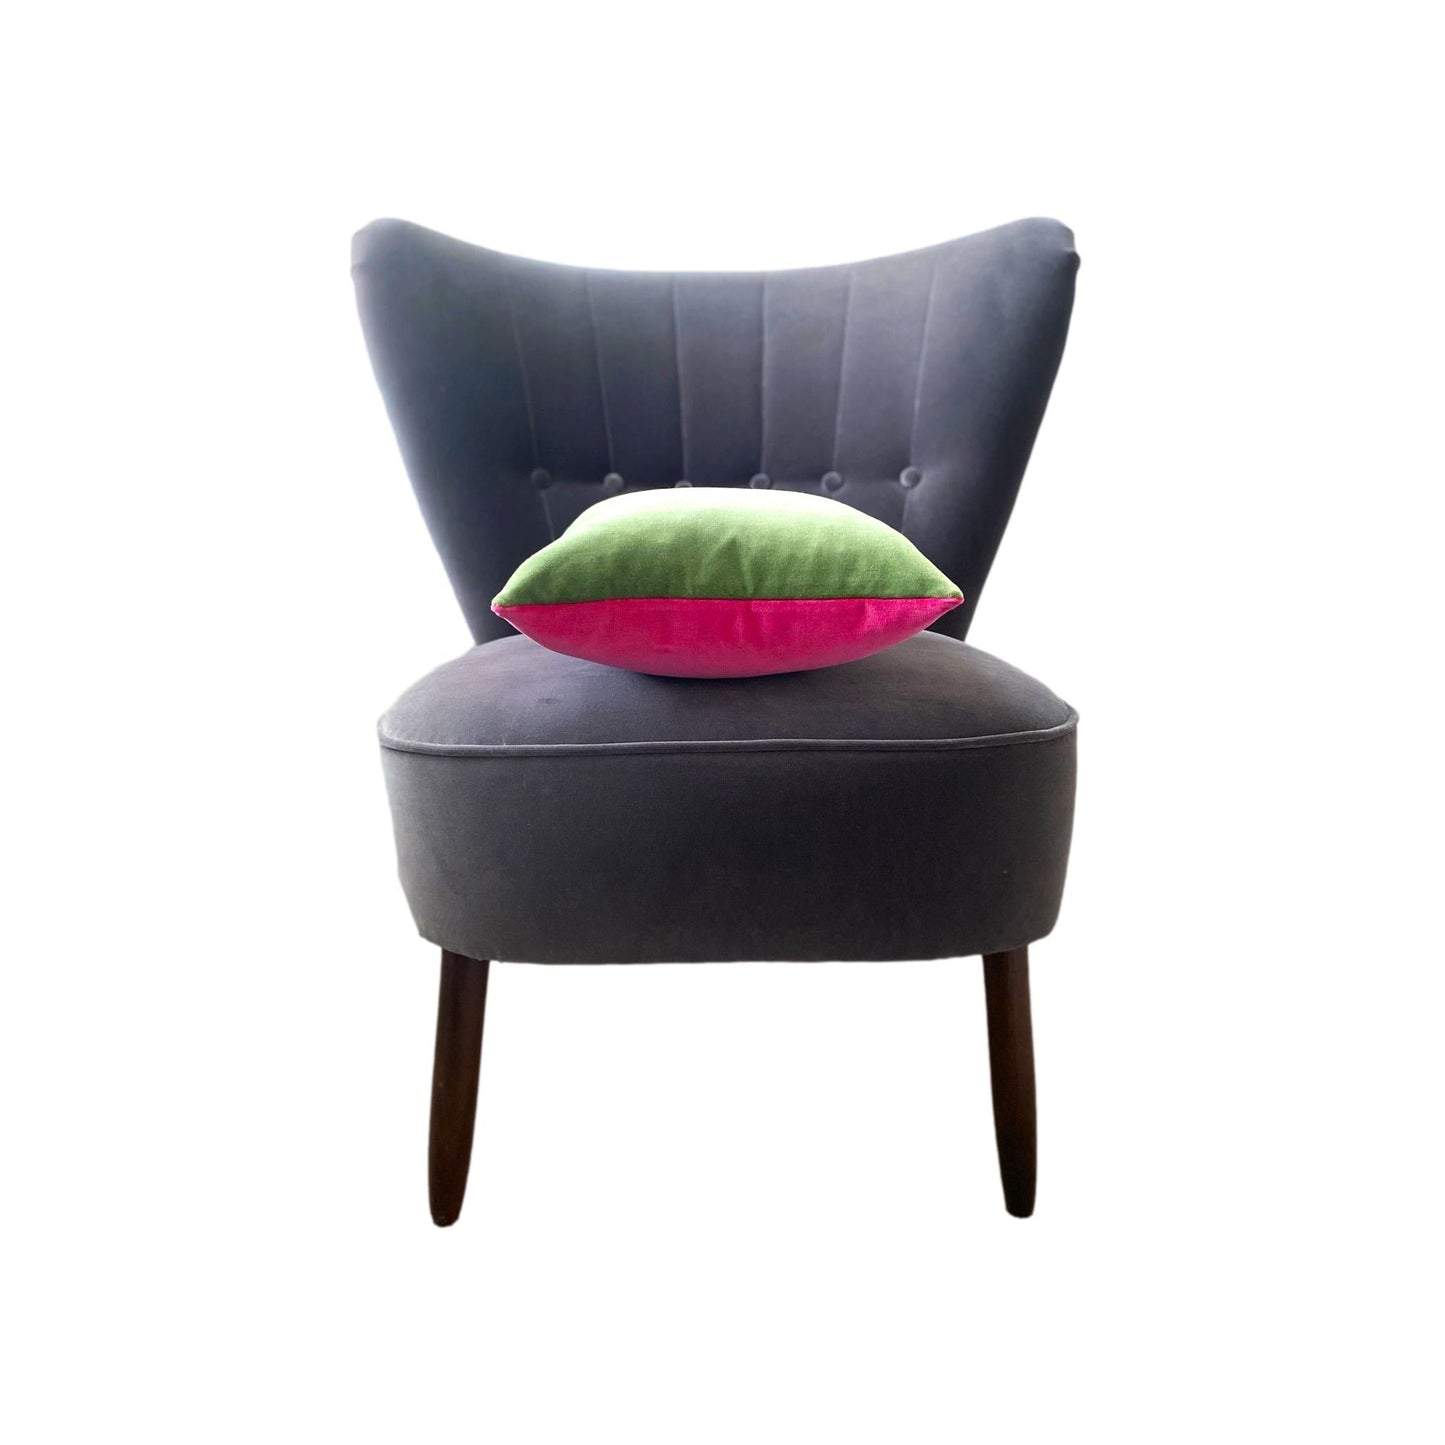 Bright Pink Velvet Cushion with Sage Green